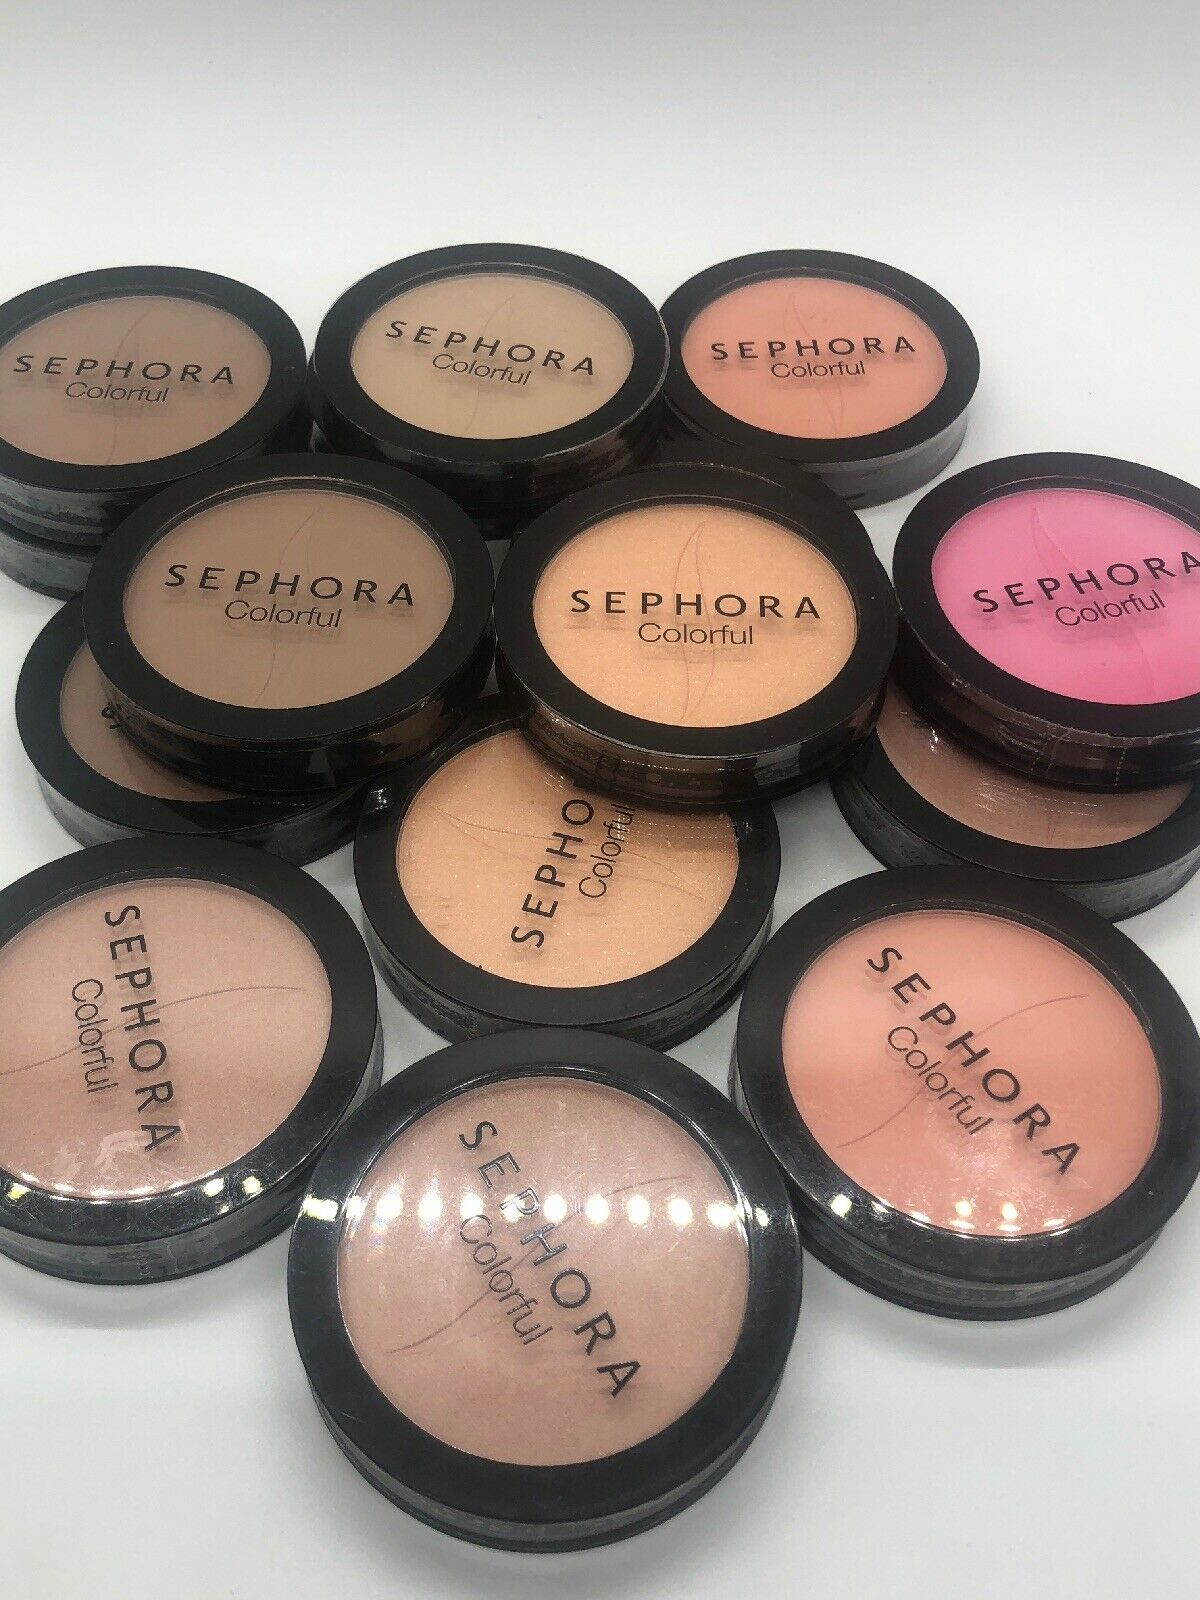 SEPHORA COLLECTION Colorful Face Powders Highlighter, Contour & Blush - YOU PICK - $13.37 - $15.35